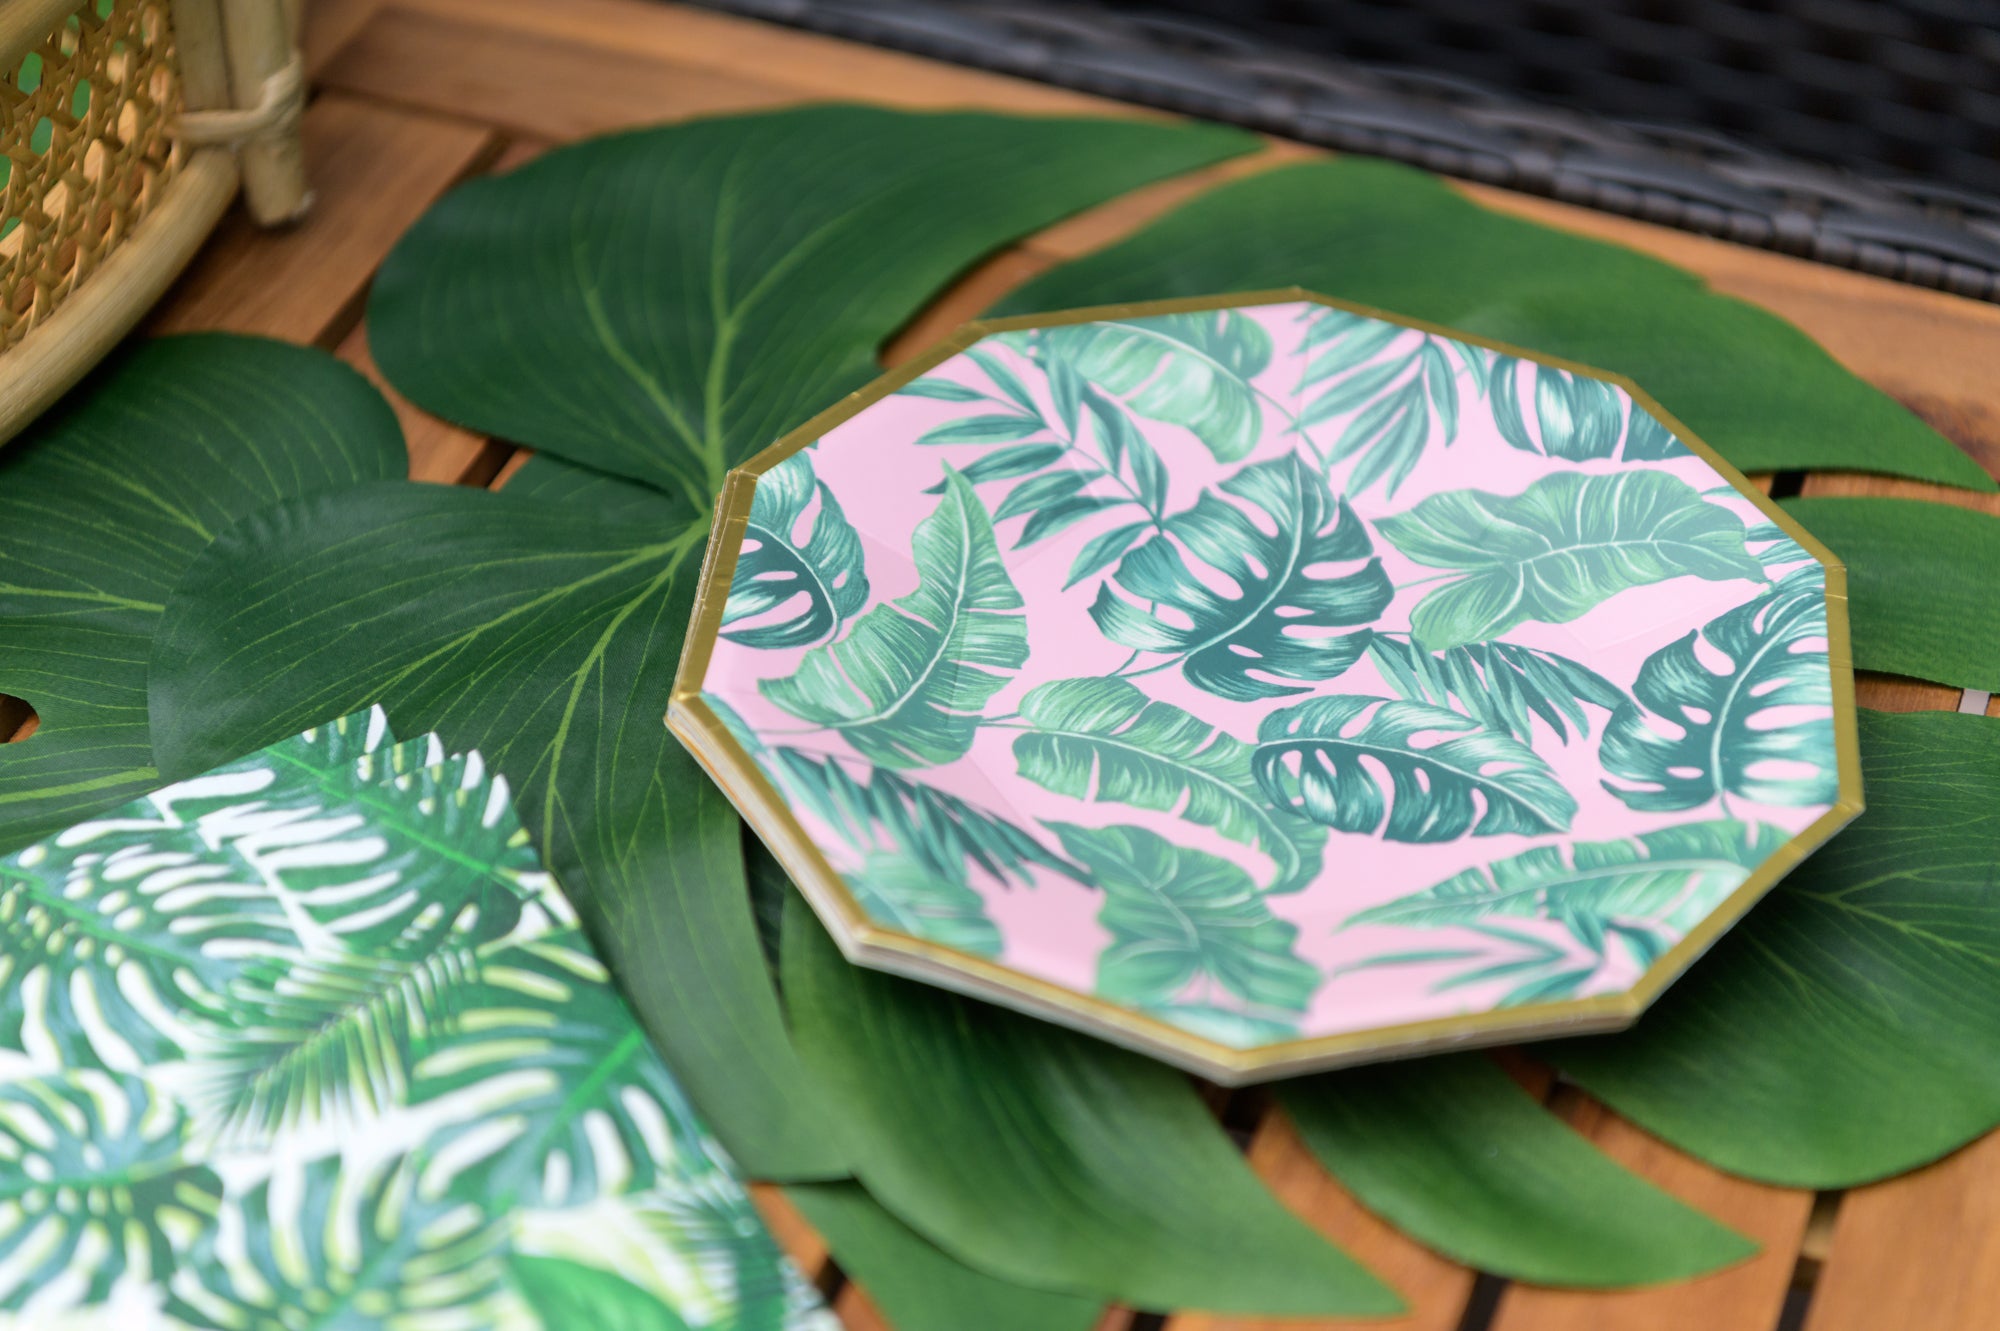 Tropical Party Pink Palm Leaf Small Decagon Paper Plates - 10pk